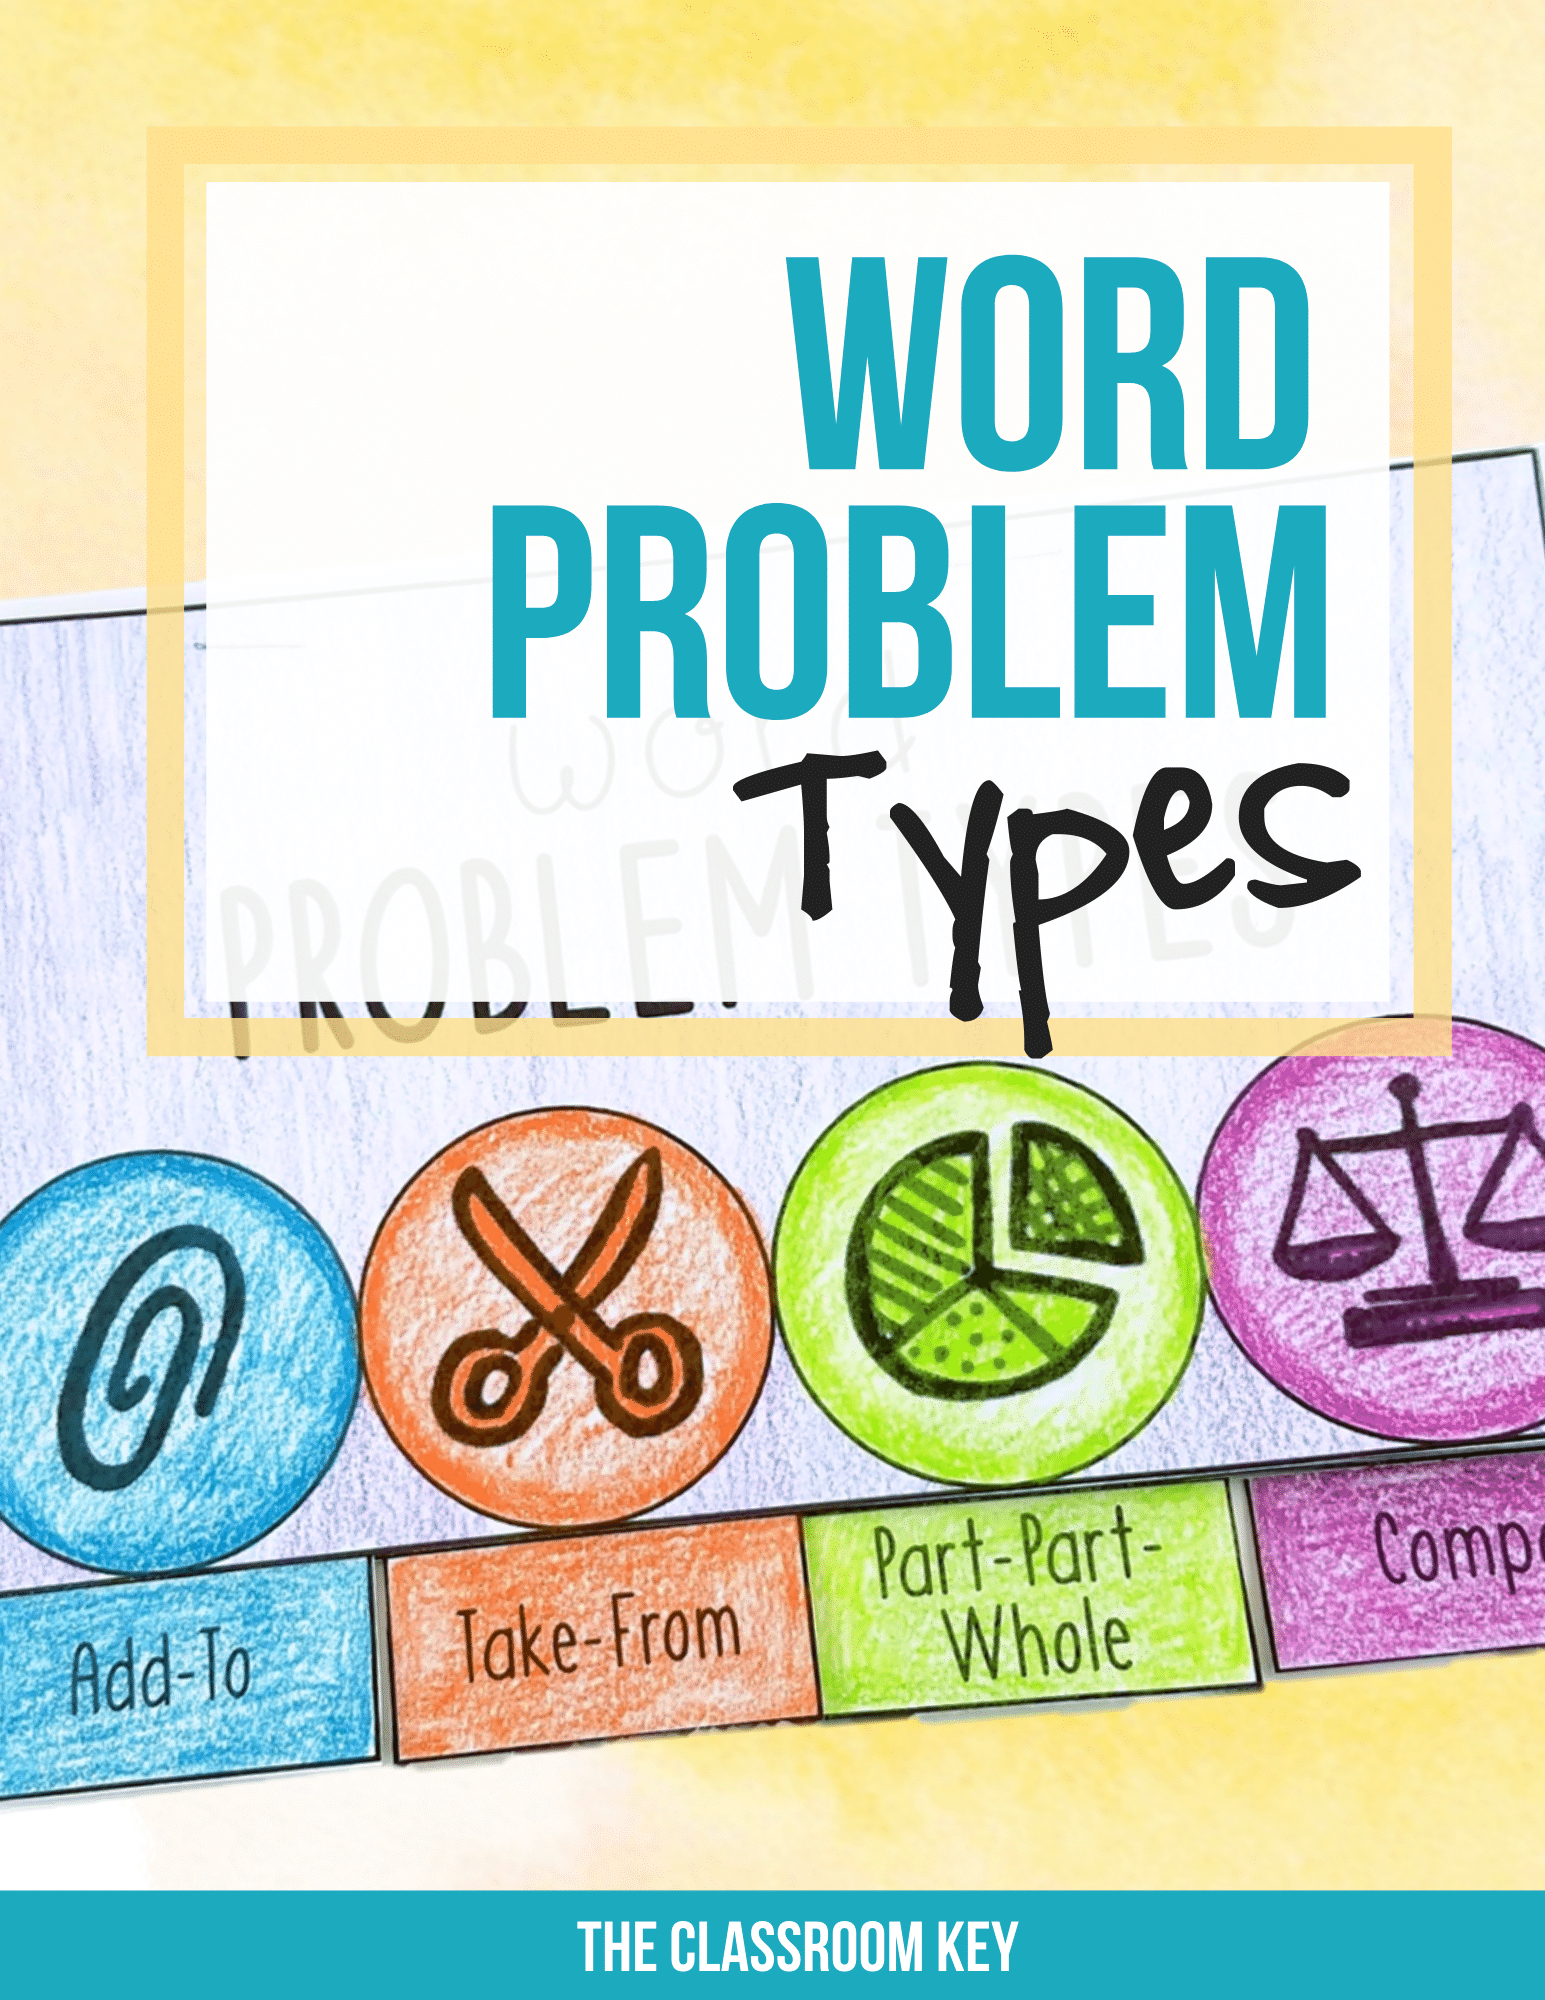 Teach accurate problem solving for word problems with this unit plan that focuses on CGI word problem types. Addition and subtraction situations are appropriate for 1st or 2nd grade math classes.